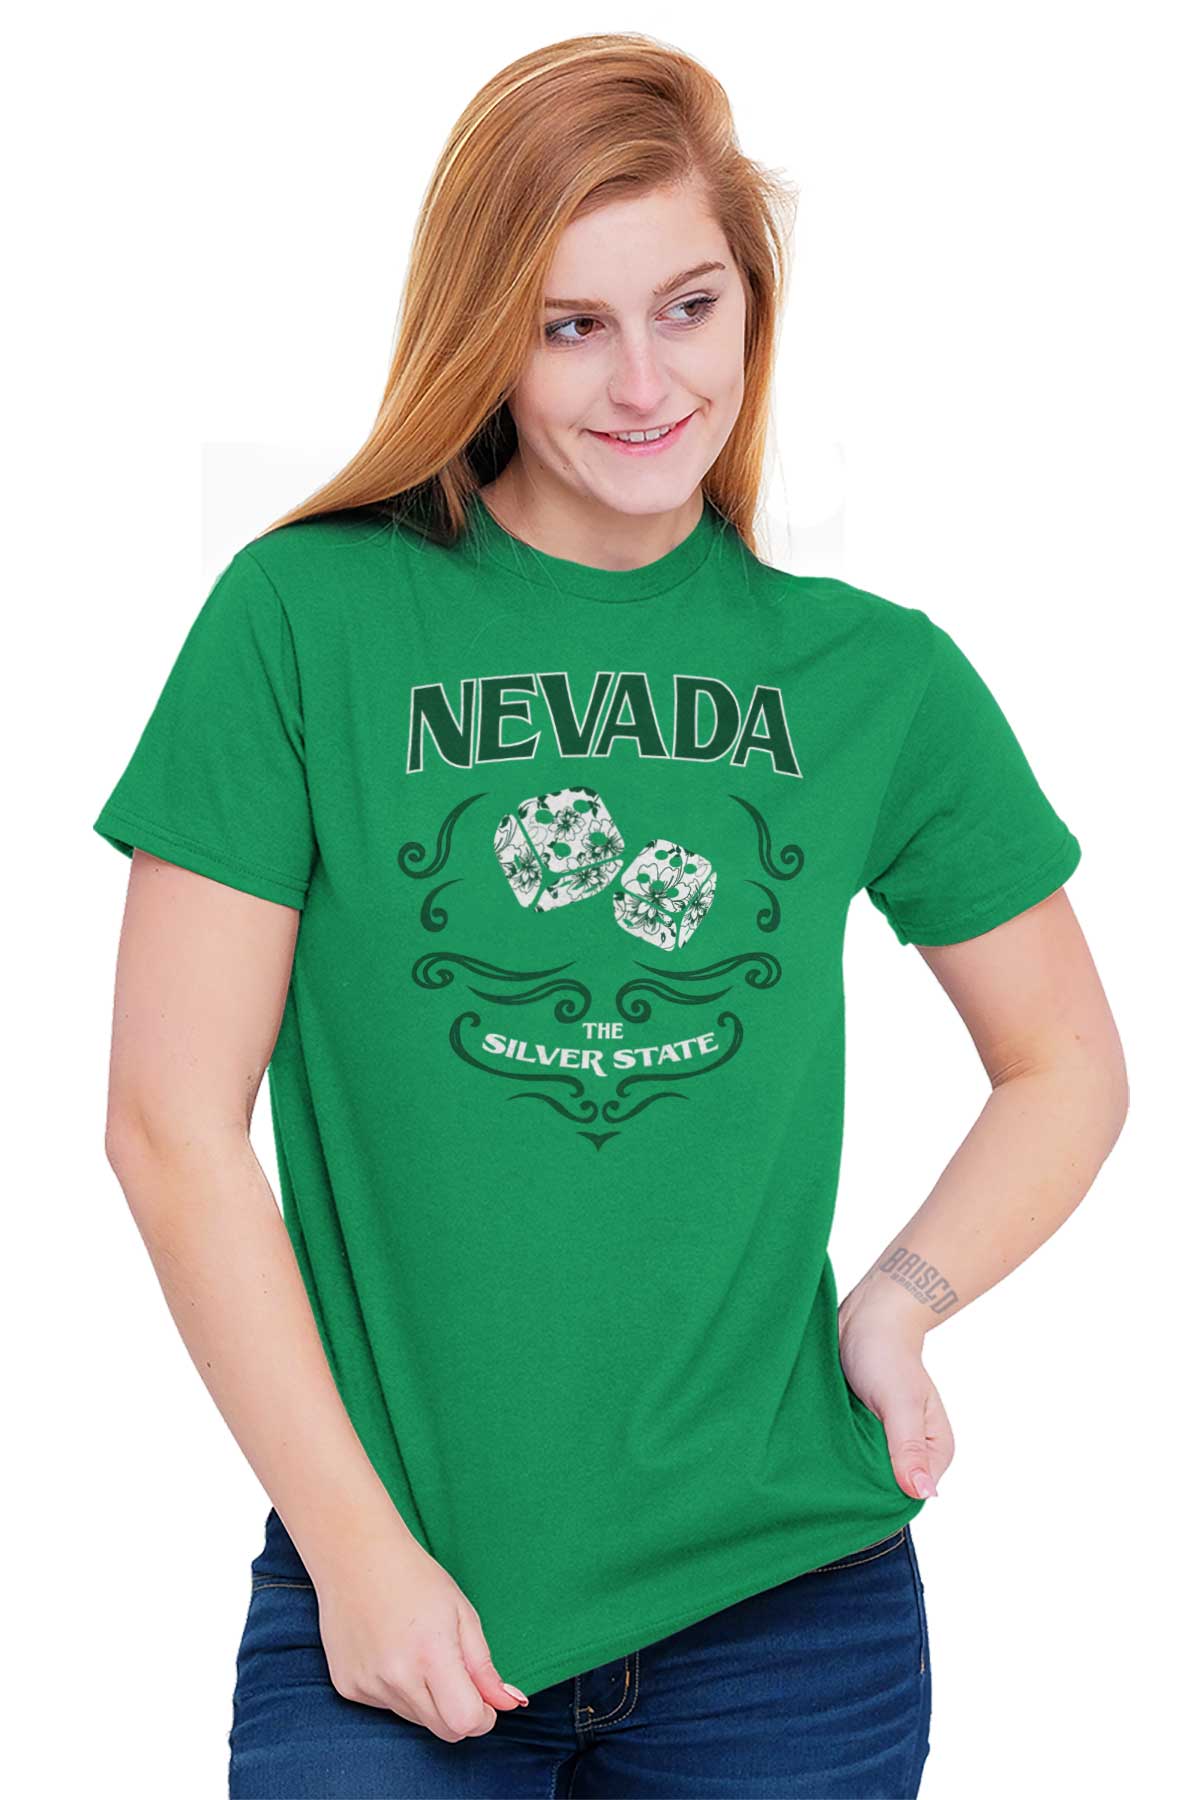 Cute Nevada Lucky Dice Floral NV Women's Graphic T Shirt Tees Brisco Brands 3X - image 5 of 6